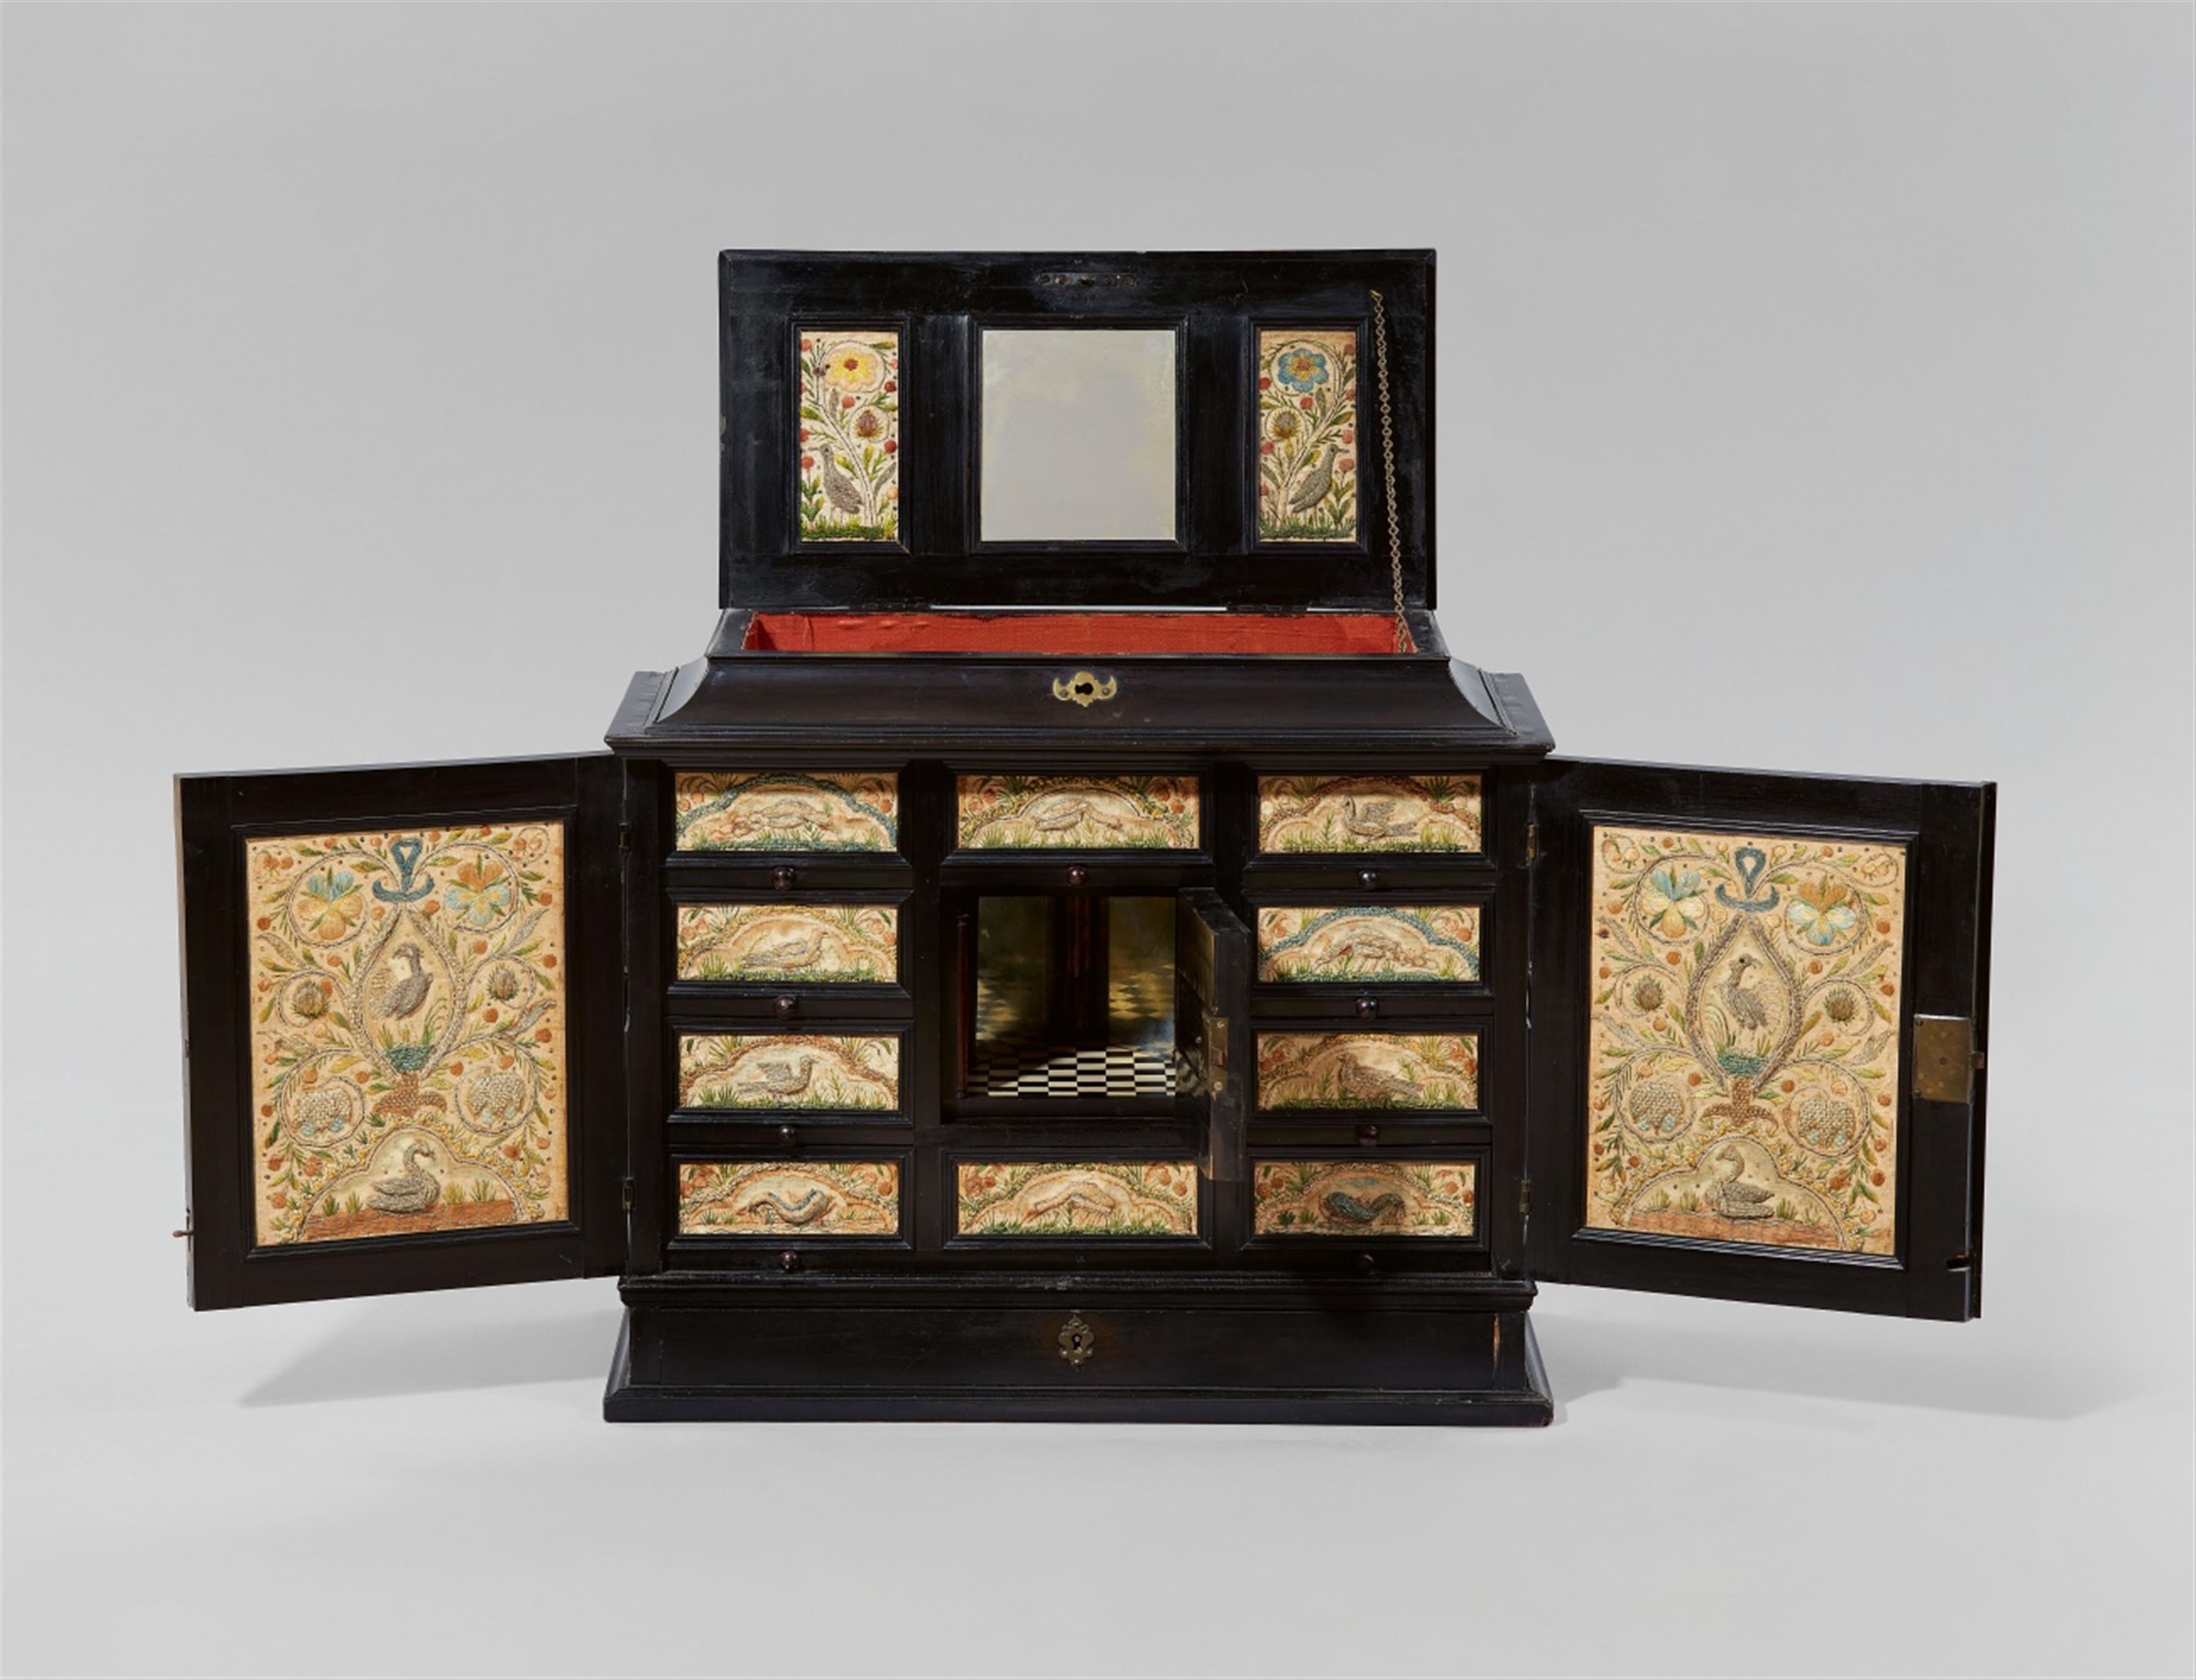 A Flemish inlaid cabinet with embroidered decor - image-1